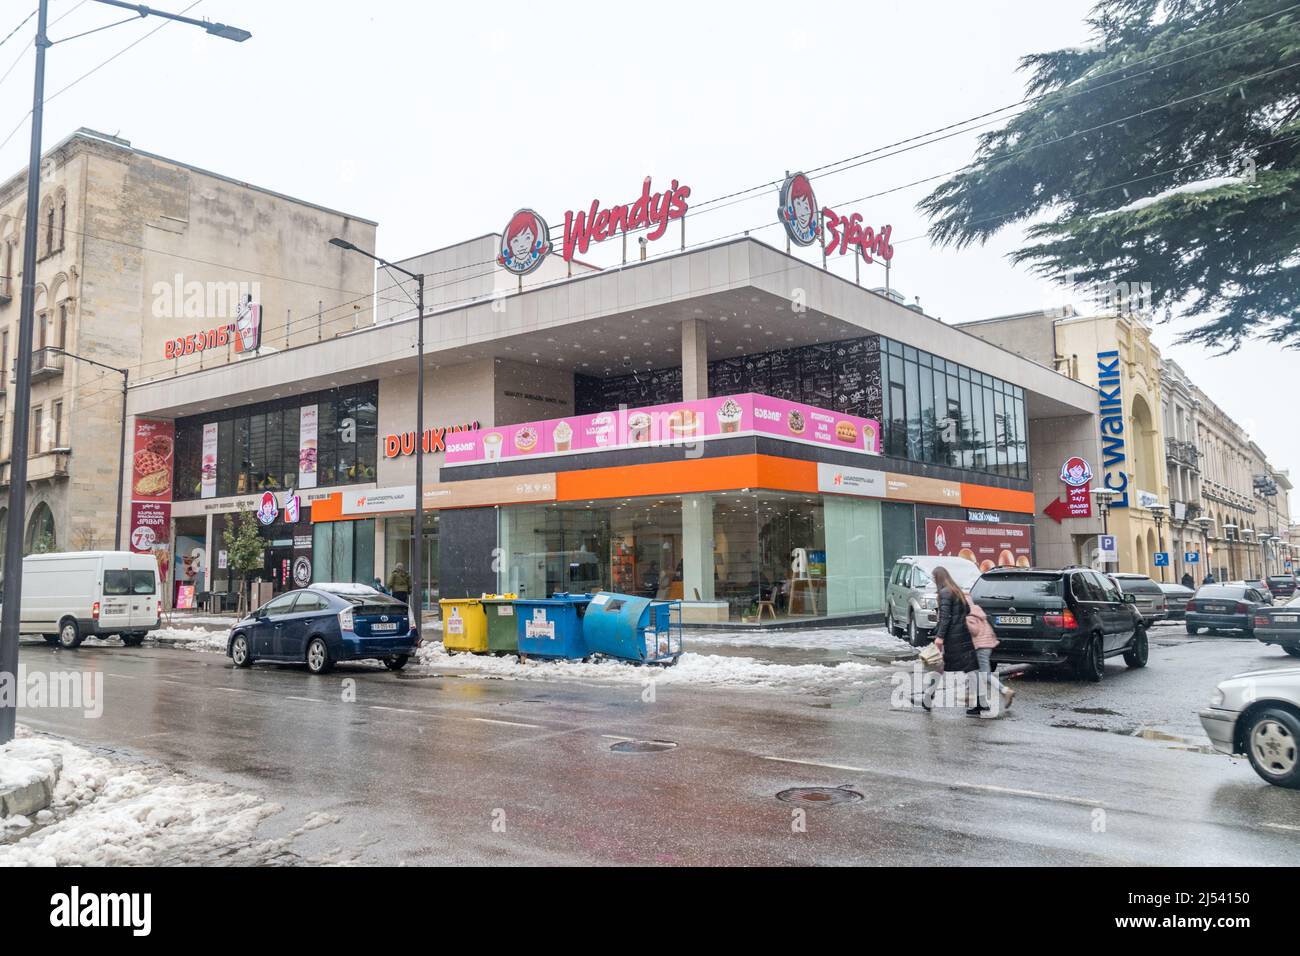 Kutaisi, Georgia - March 17, 2022: Dunkin’ Donuts and Wendy's restaurant in Kutaisi. Dunkin' Donuts is American multinational coffee and doughnut comp Stock Photo